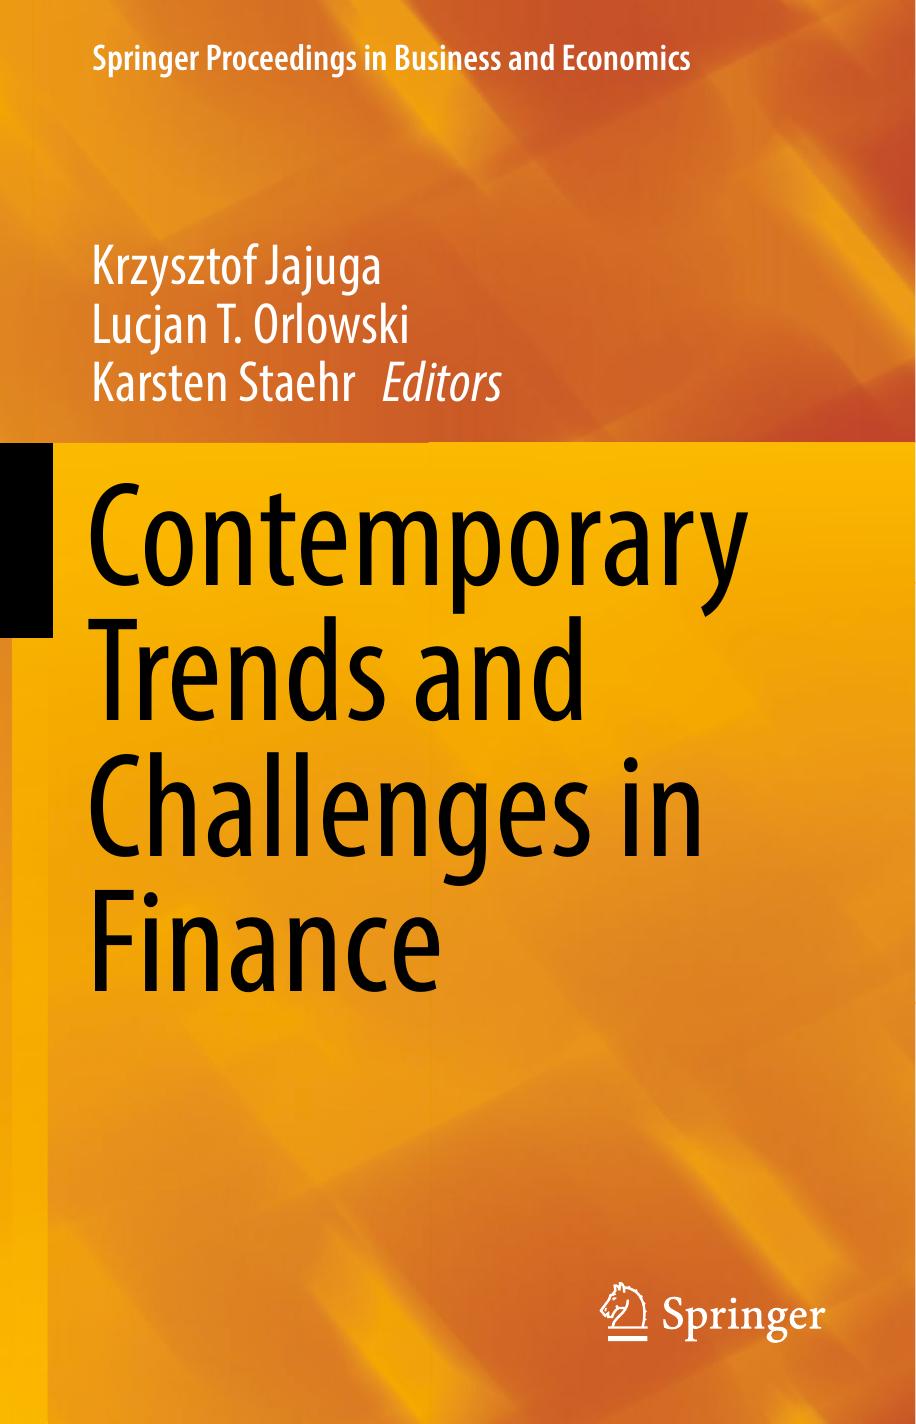 Contemporary Trends and Challenges in Finance 2017.pdf